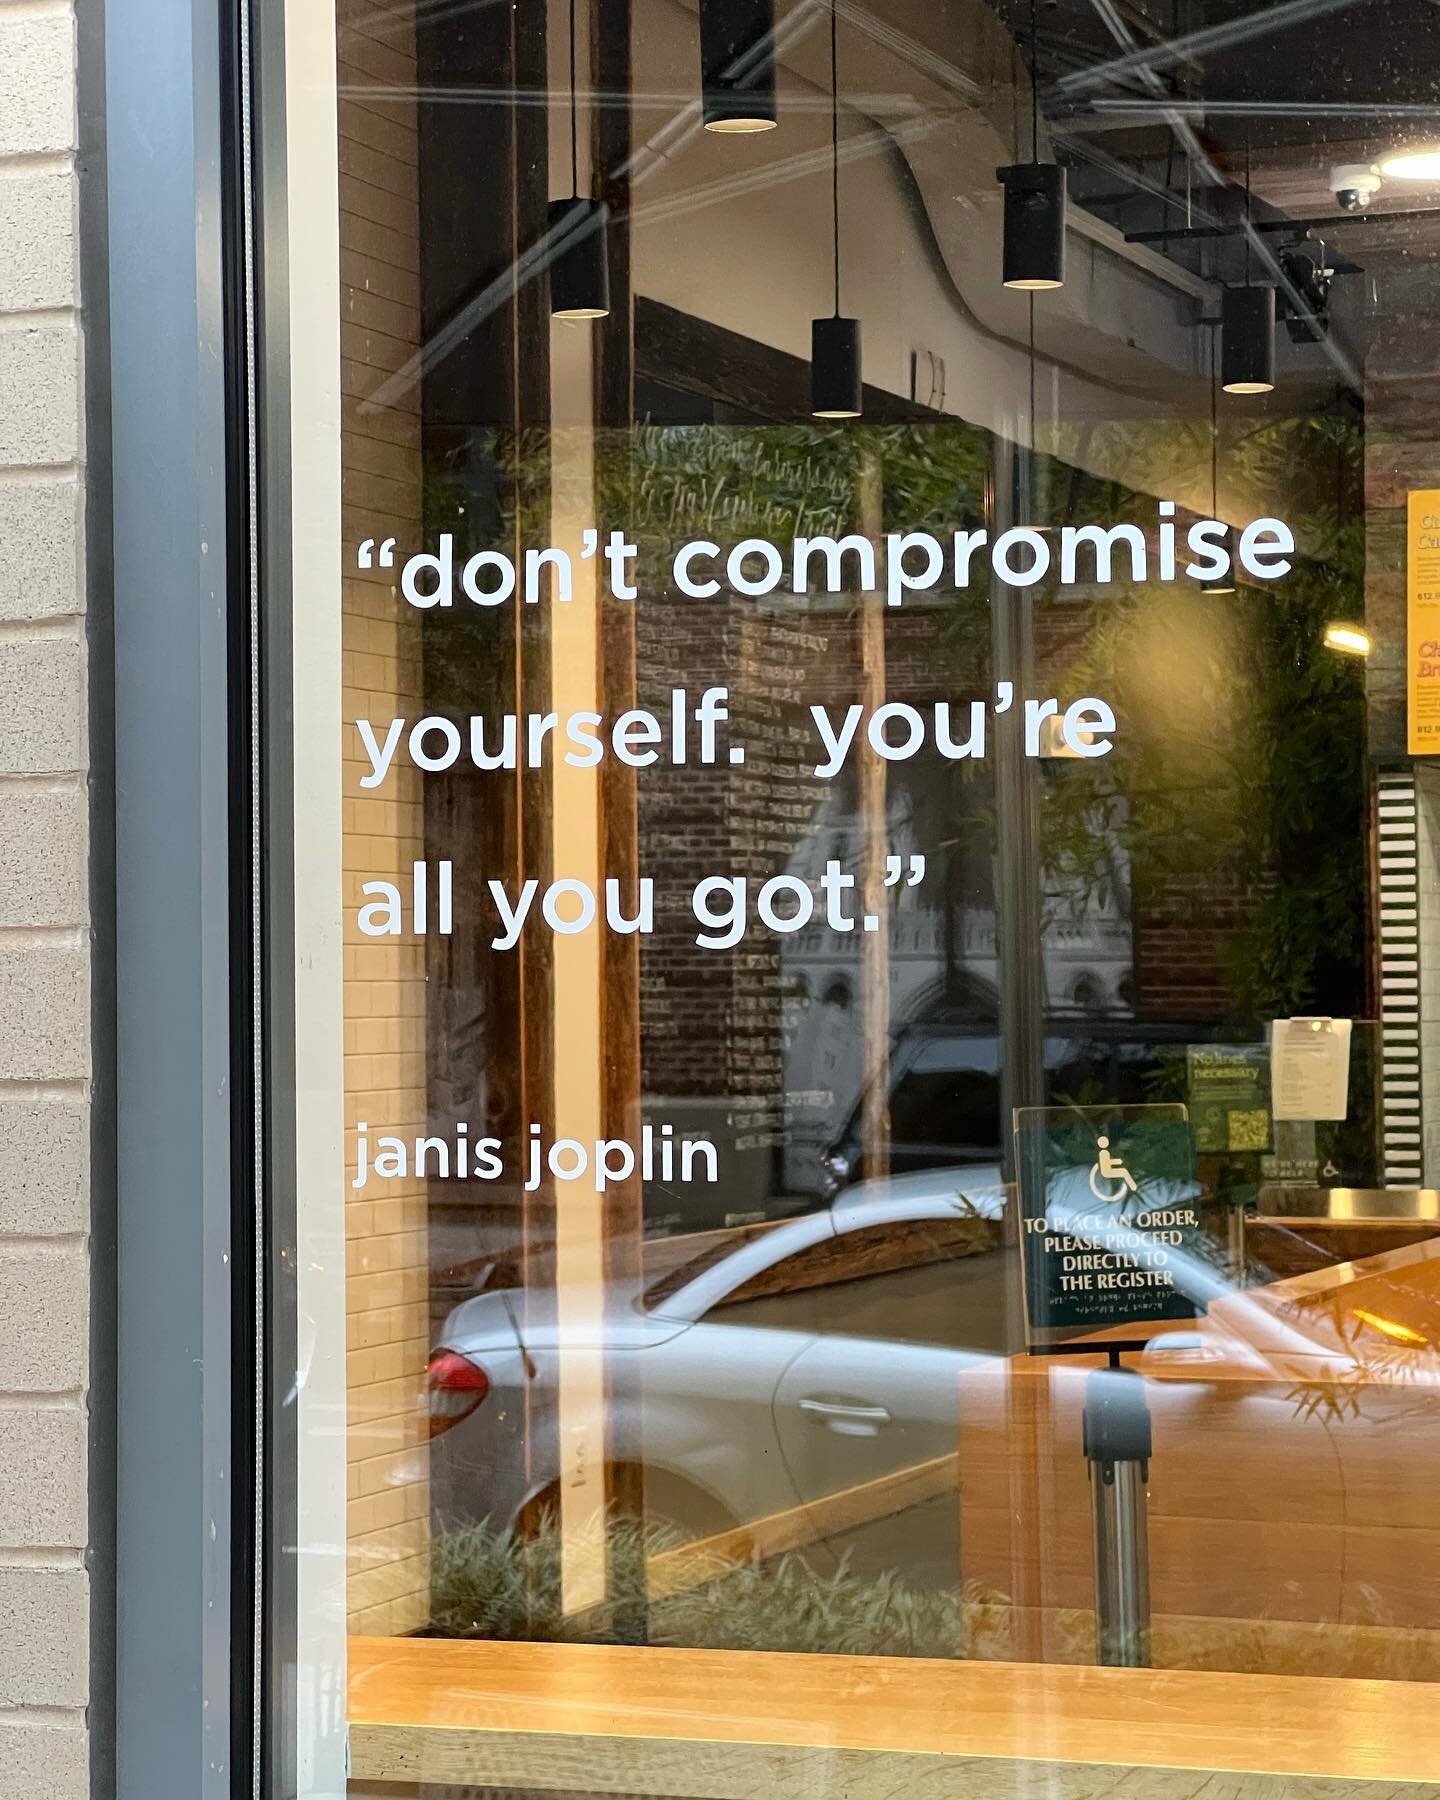 Don't compromise yourself. You're all you got. #janisjoplin 

What are you doing to take care of your ONE BODY this holiday season? 

Ab Rehab starts December 1.  30 days of daily tips and 5 minute Ann workouts to jumpstart or supplement your fitness